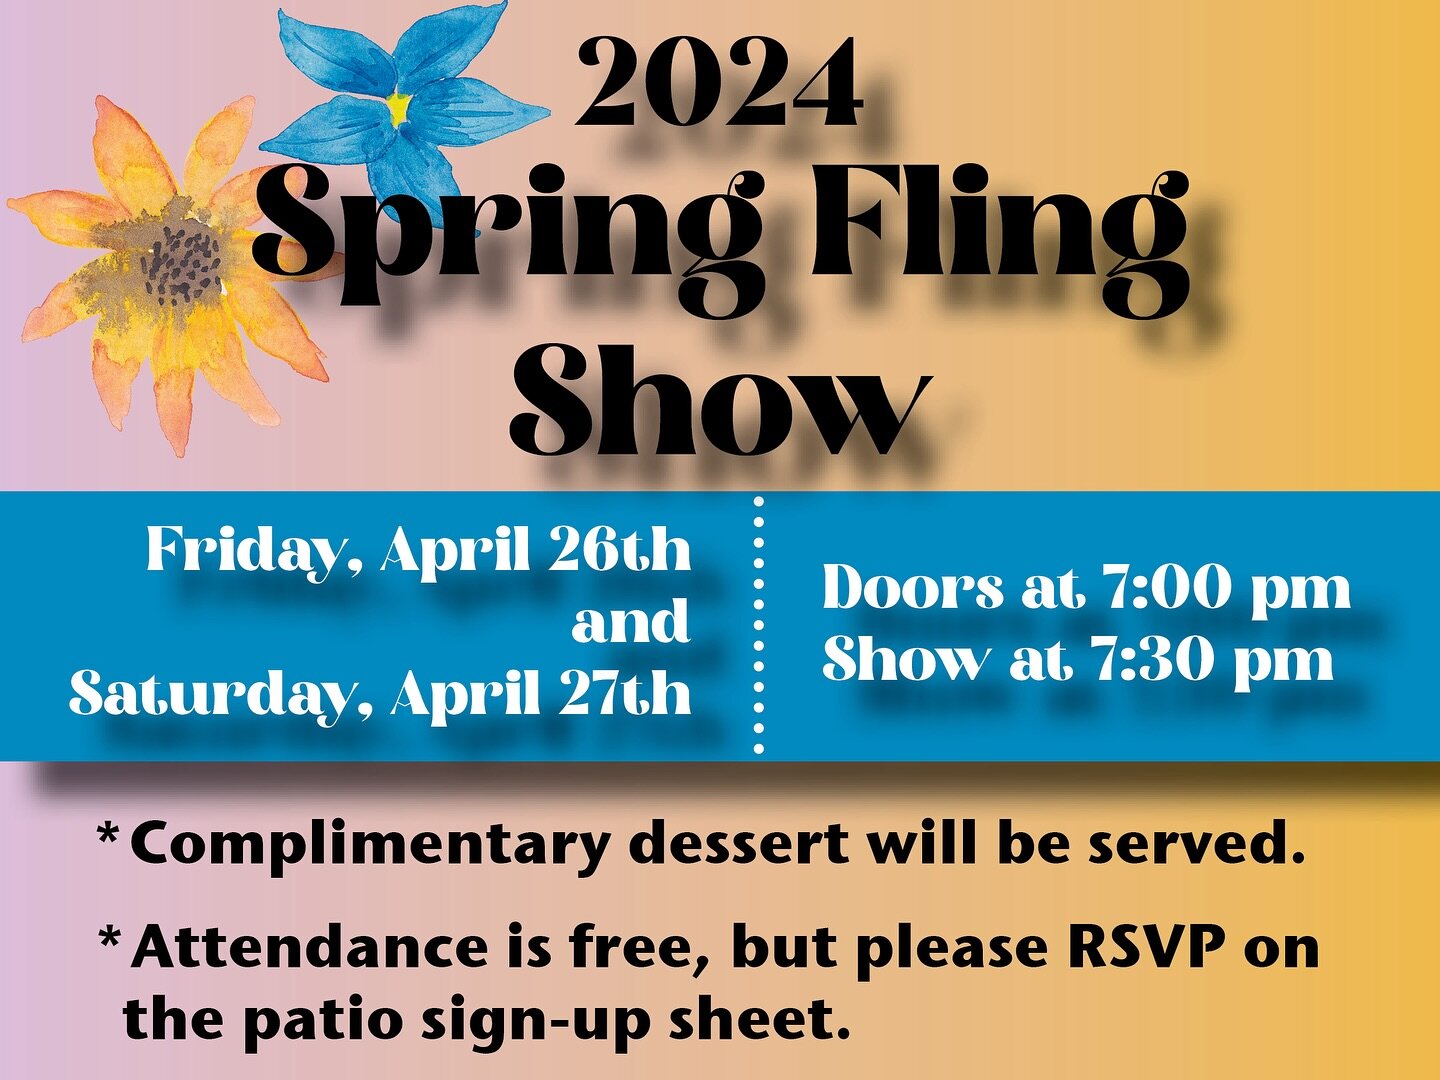 𝐒𝐩𝐫𝐢𝐧𝐠 𝐅𝐥𝐢𝐧𝐠 𝐒𝐡𝐨𝐰

Hello friends and family! We are so excited to invite you to our Spring Fling variety show happening later this month. Our cast is made up of our church family and close friends, and we would be delighted to have you